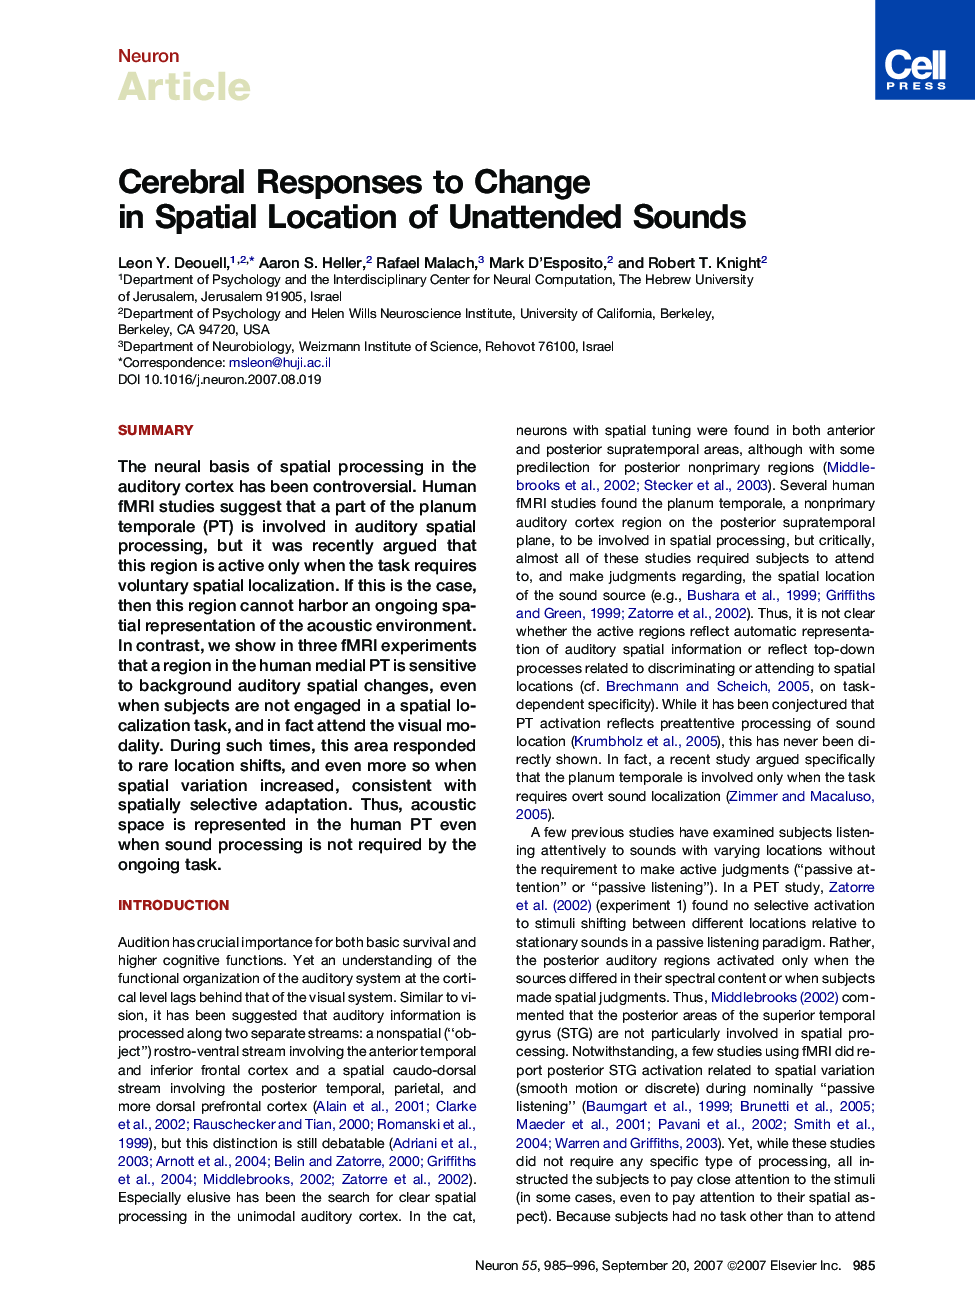 Cerebral Responses to Change in Spatial Location of Unattended Sounds